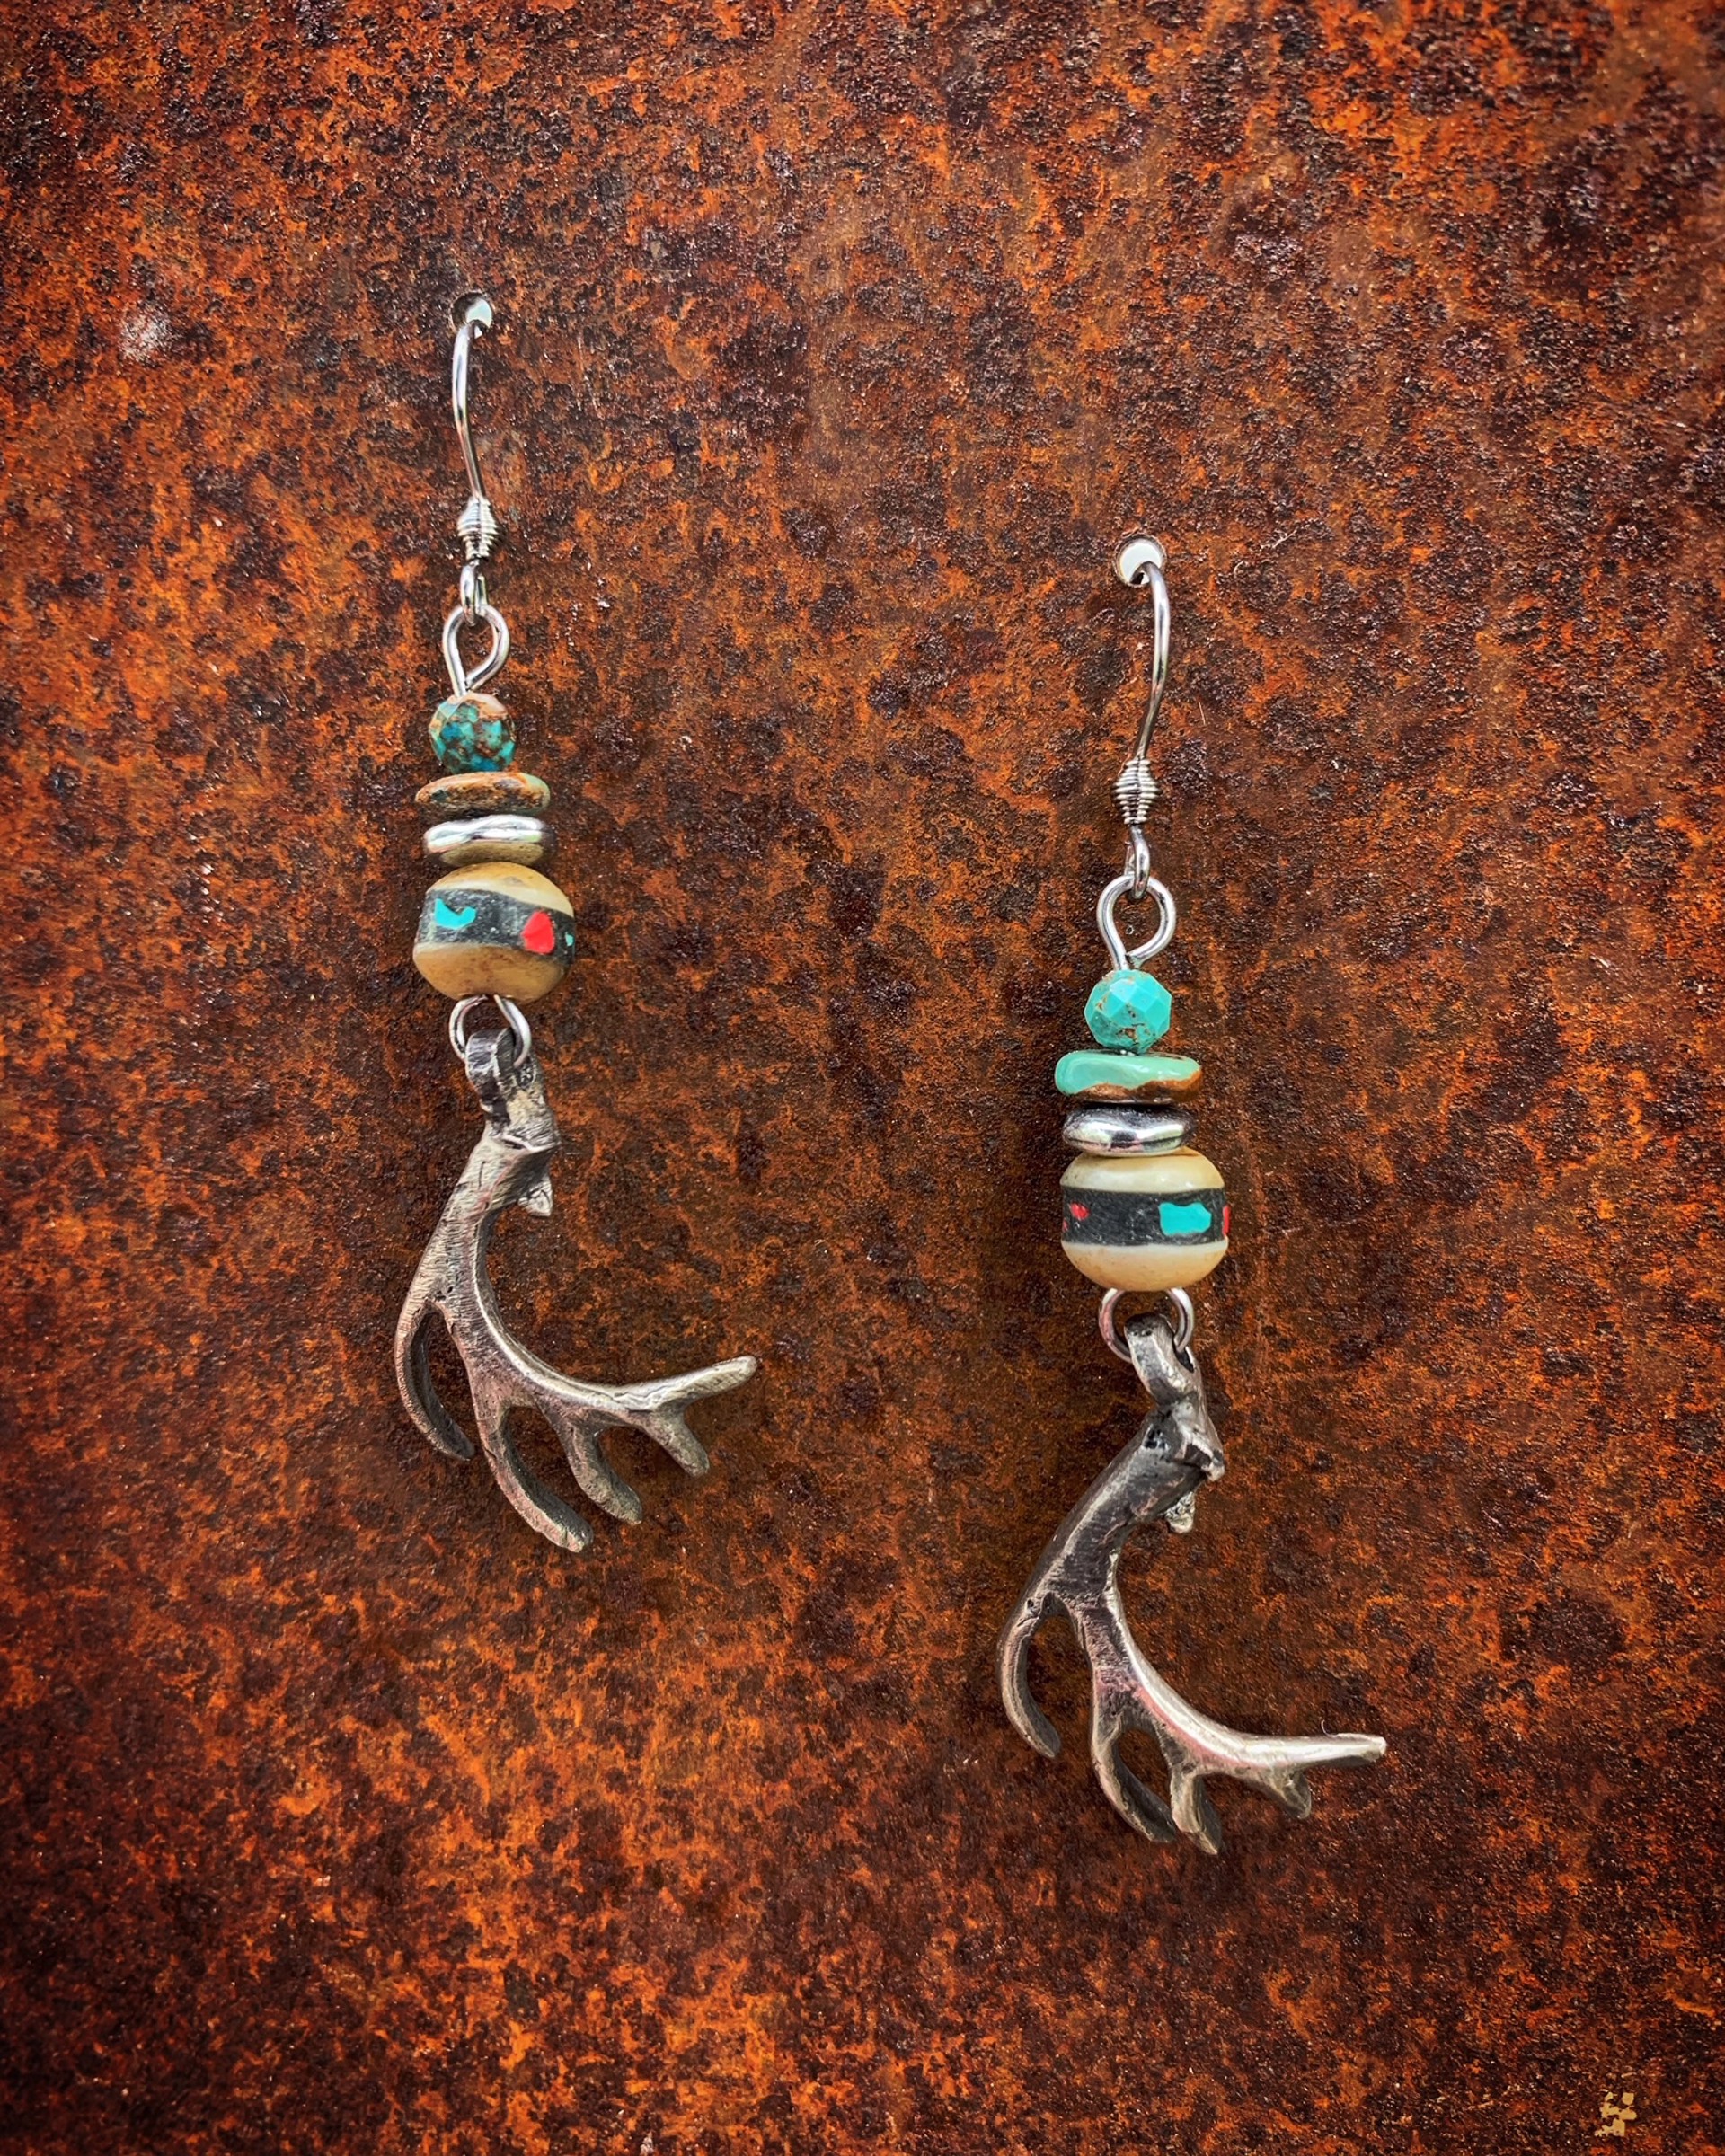 K829 Antler Earrings with Tibetan Beads by Kelly Ormsby